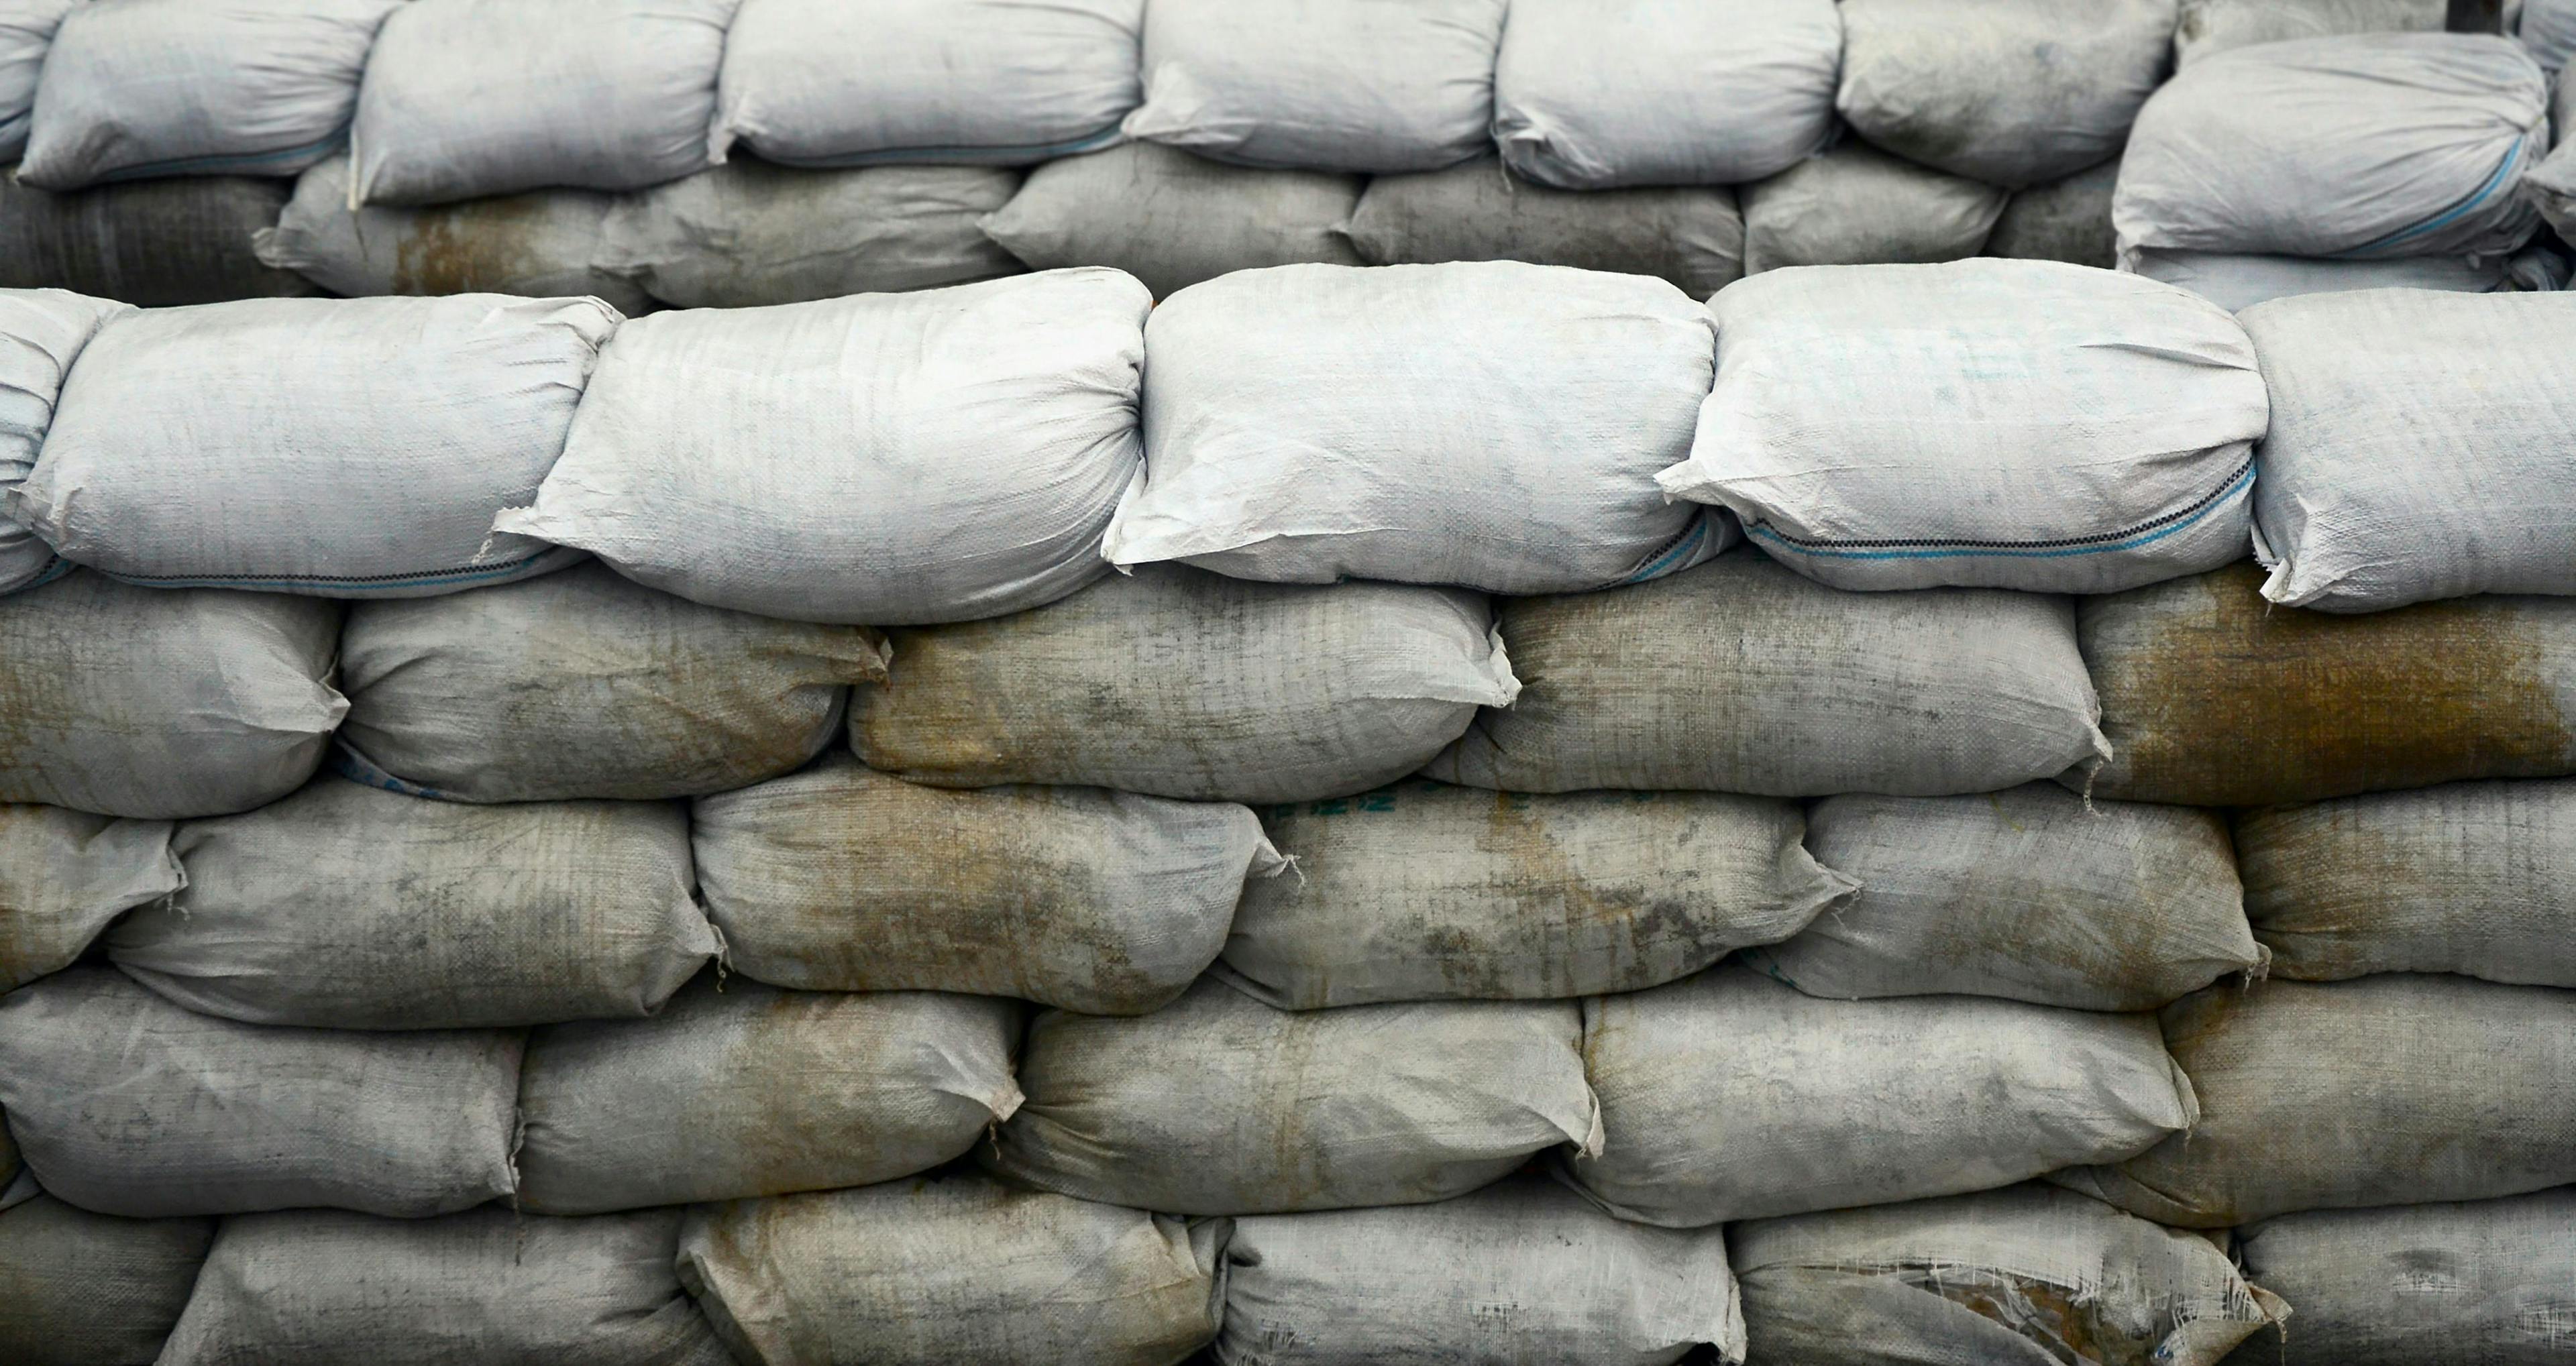 Stacks of grey sandbags, arranged in several horizontal rows, form a barricade. The sandbags are tightly packed and slightly weathered, indicating outdoor use, likely in a construction or defense setup.